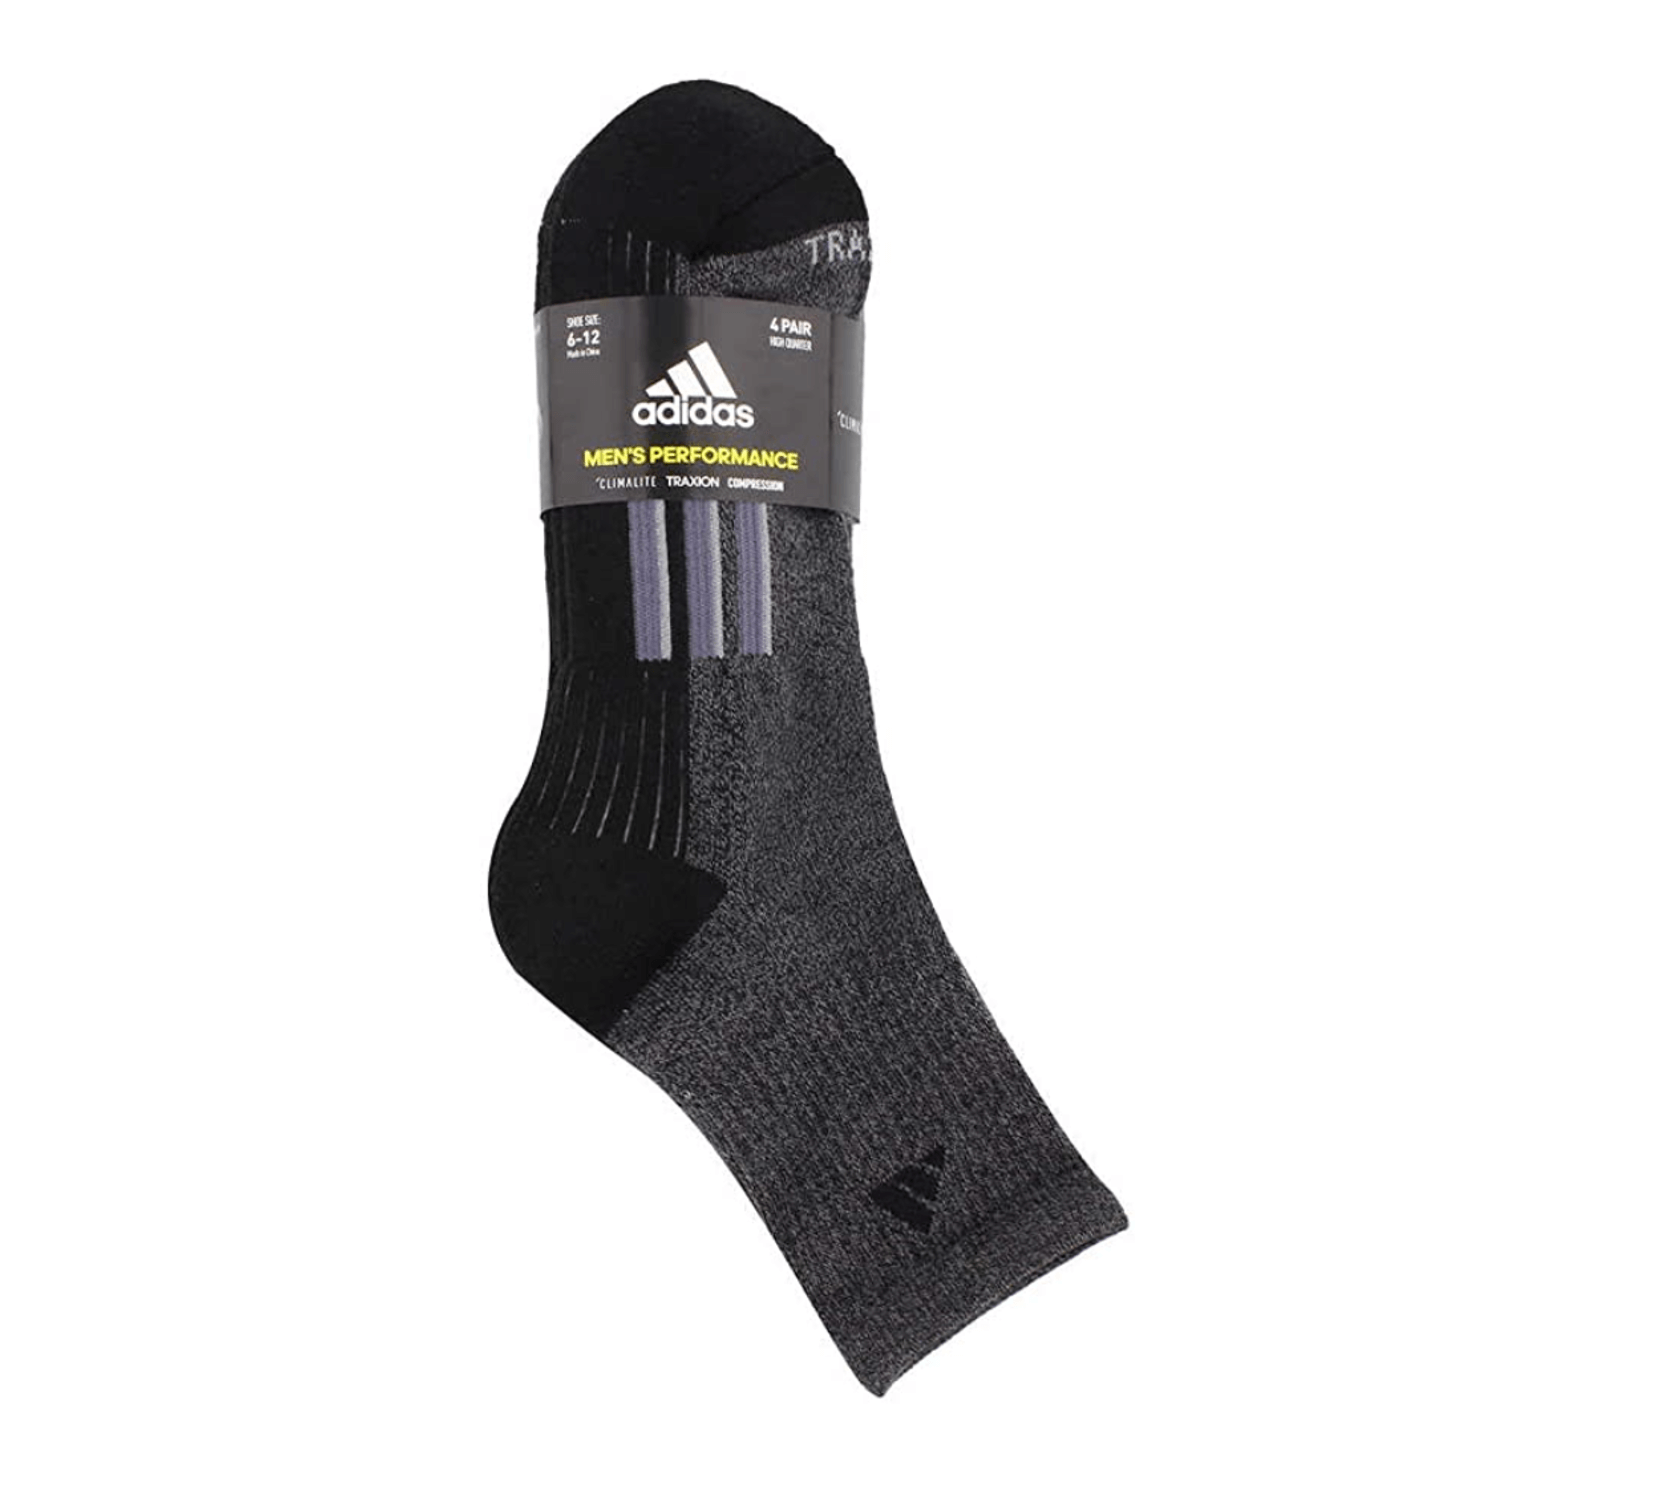 A pack of Adidas Mens Performance Climalite Socks four Pairs in black and grey.